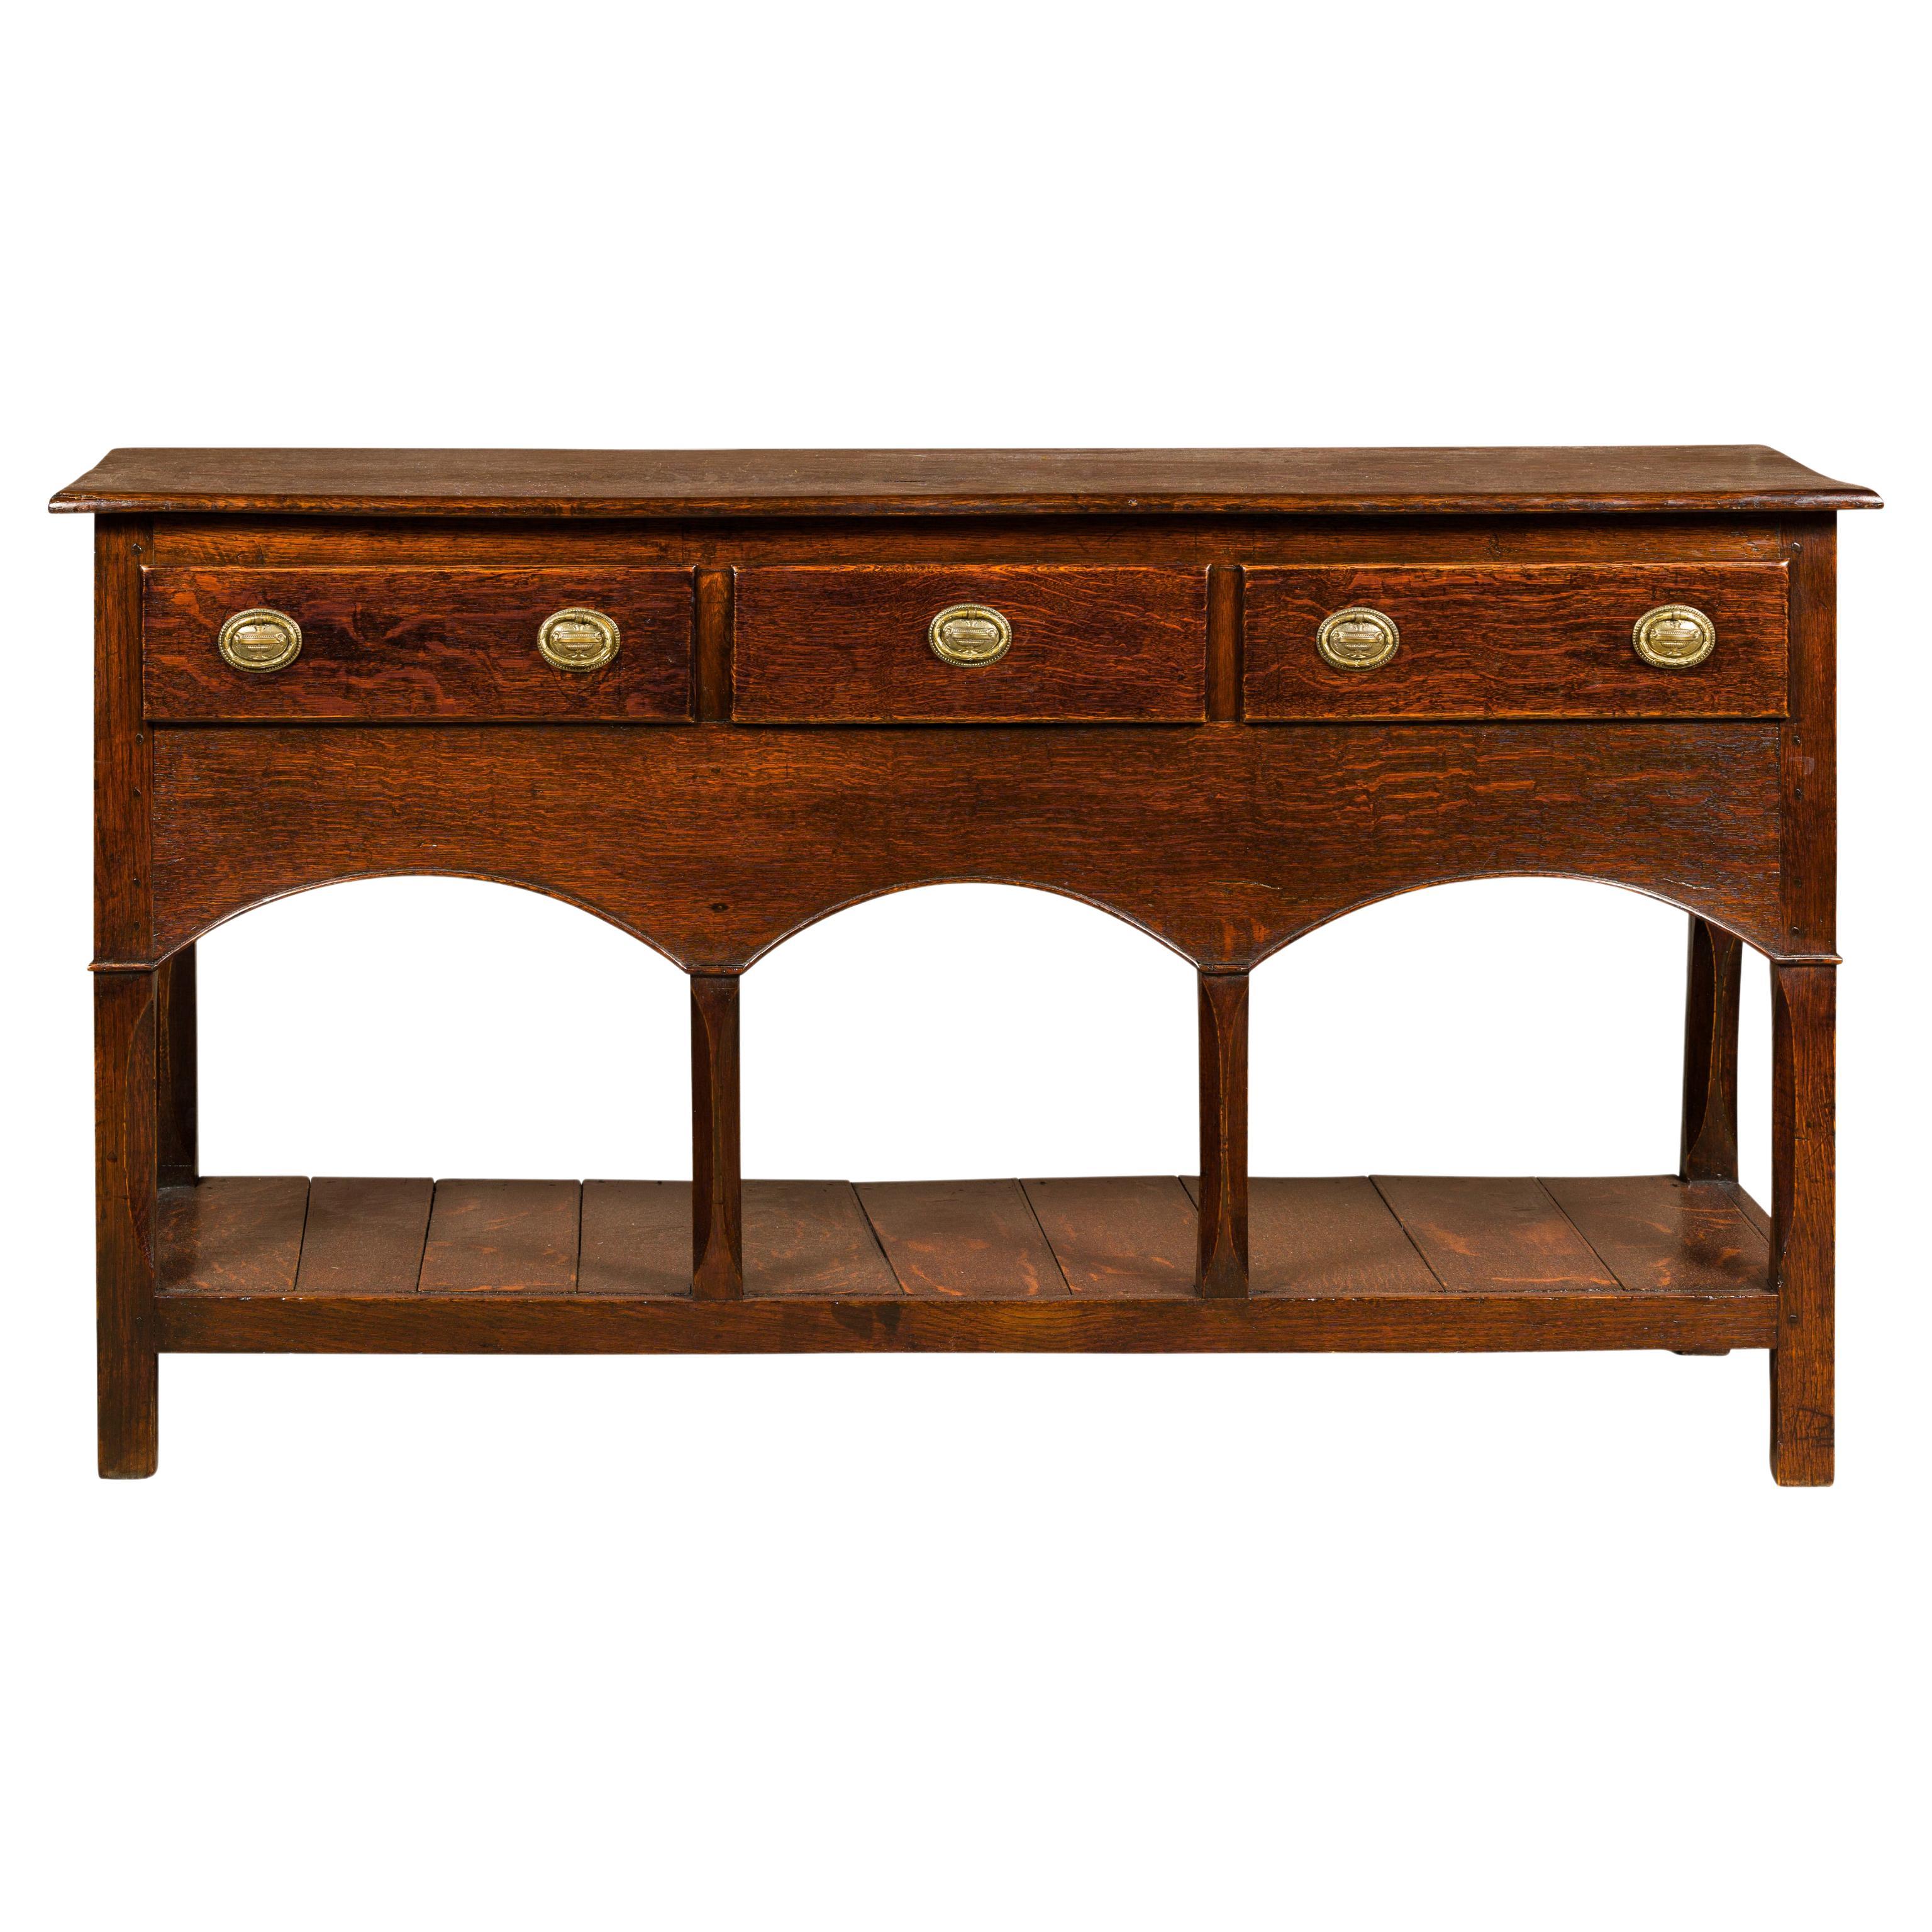 English George III 1800s Oak Dresser Base with Three Drawers and Arching Accents